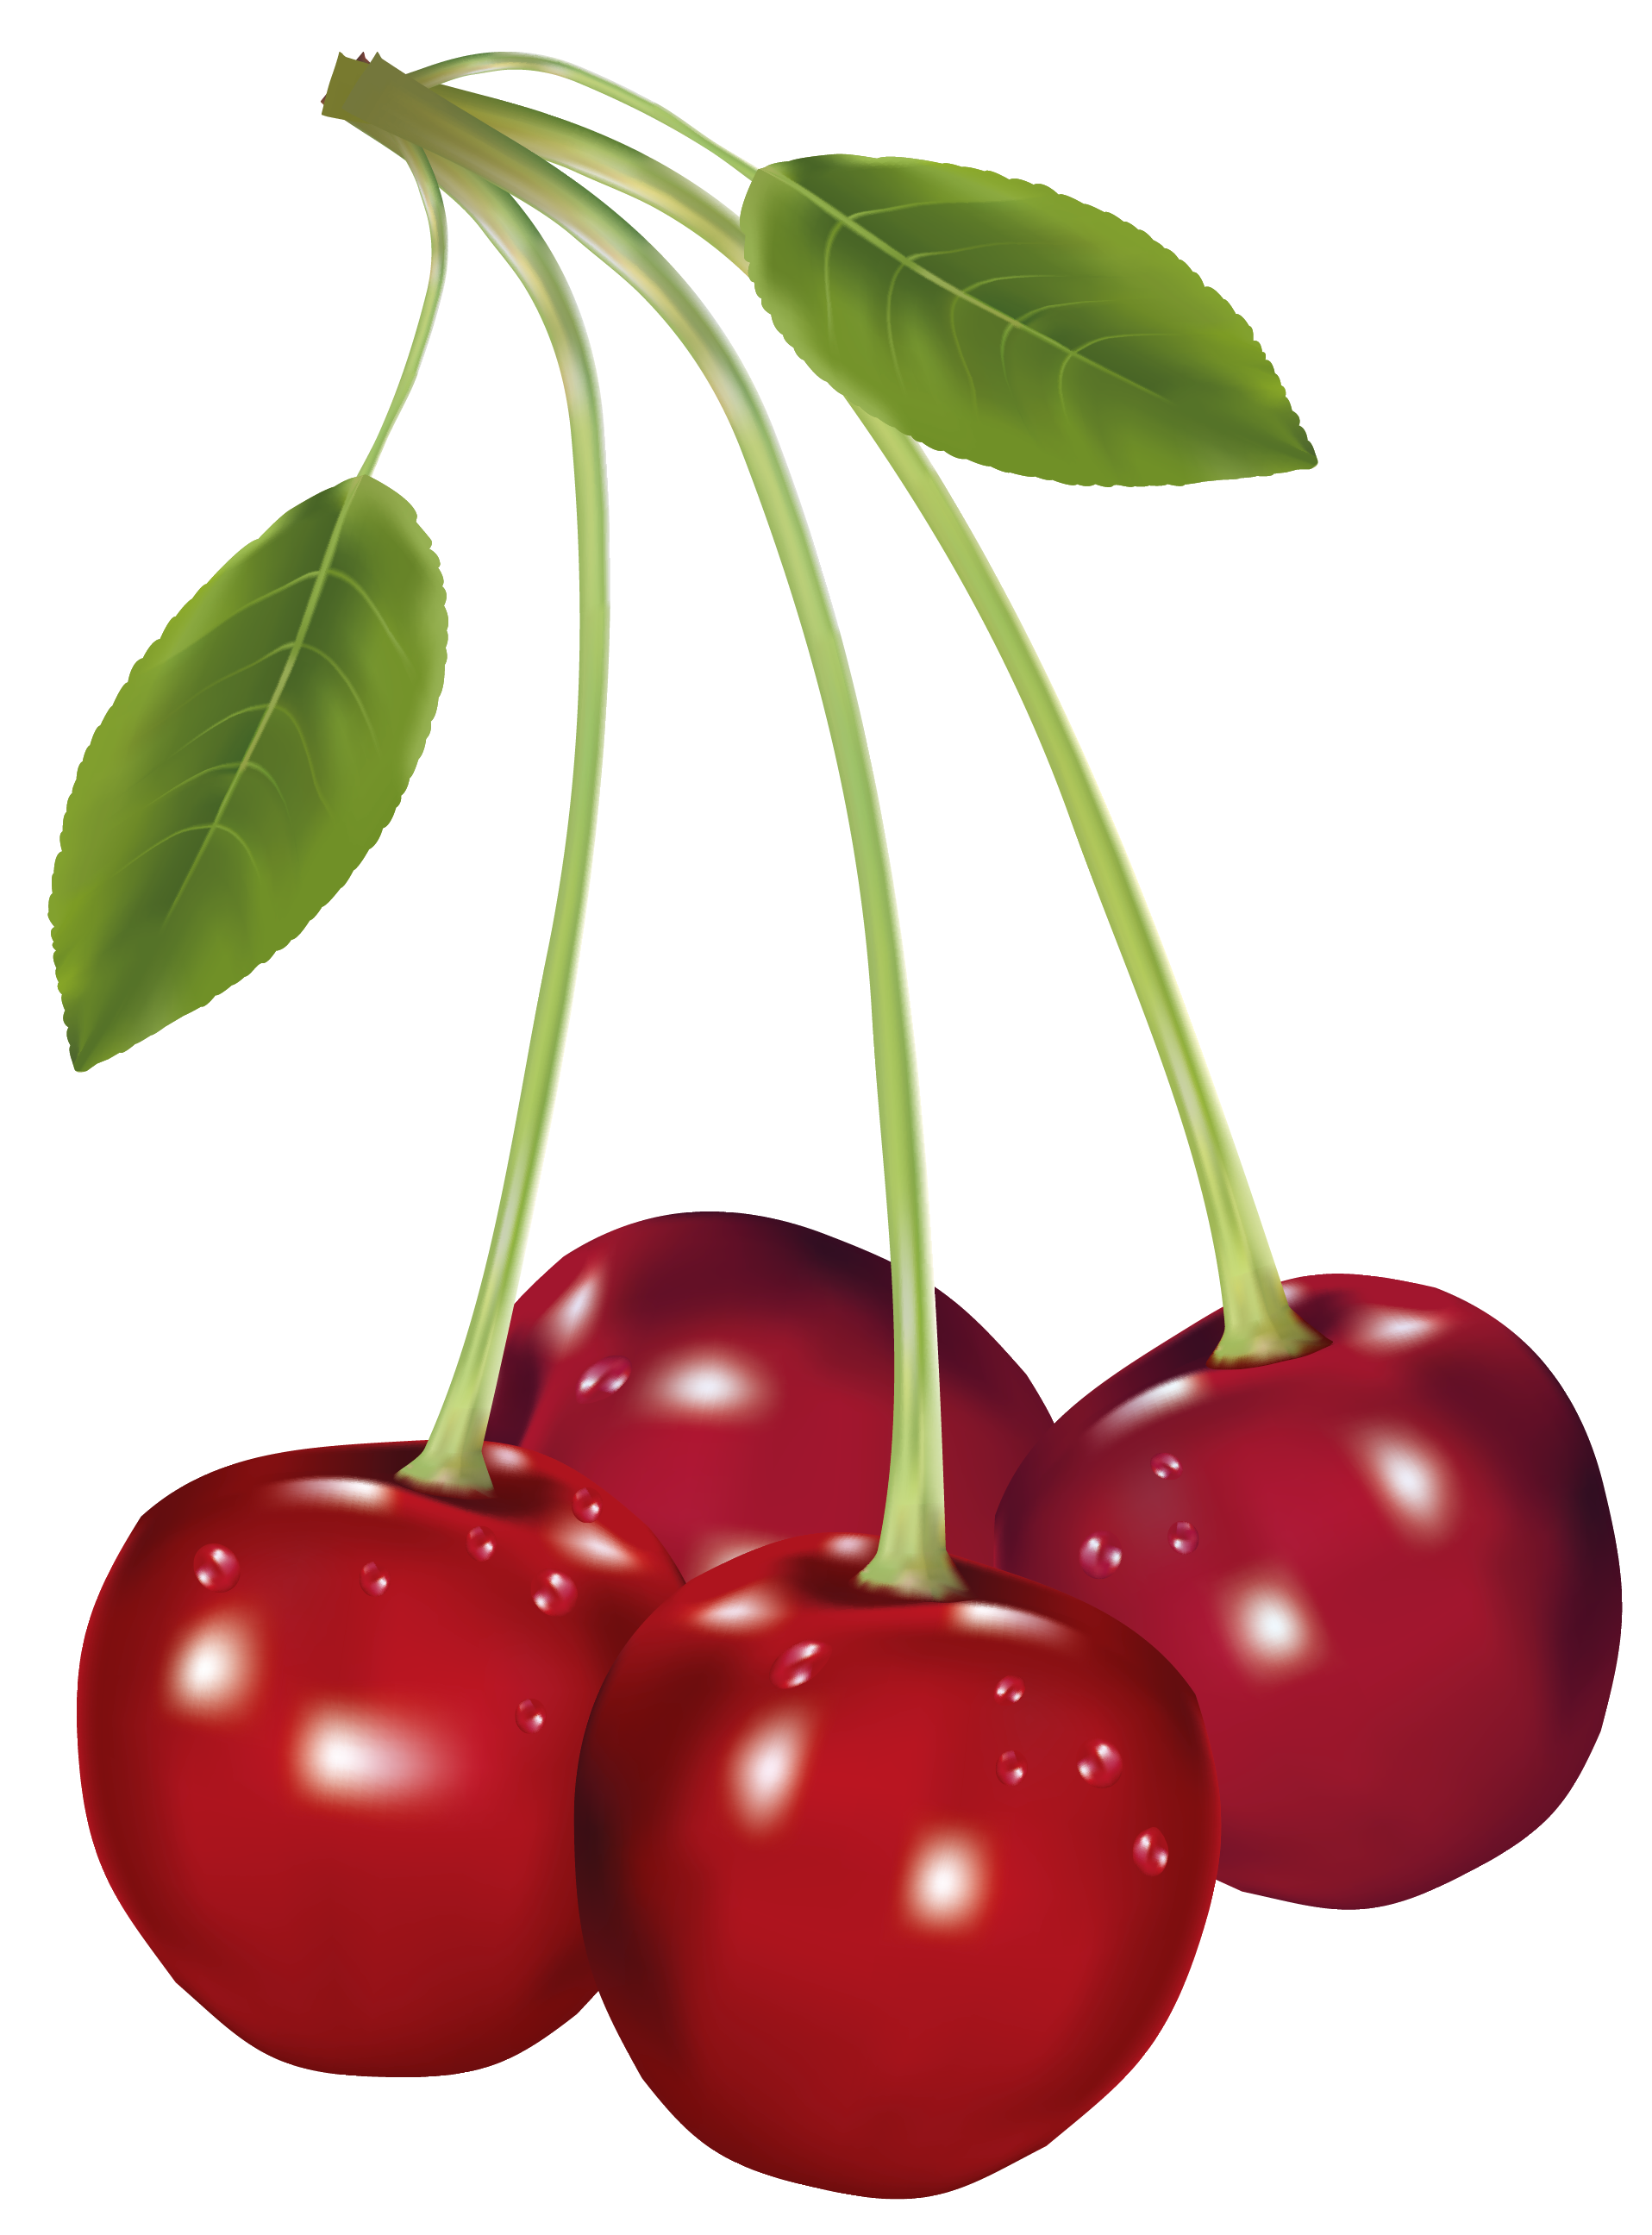 Cherries png picture gallery. Cherry clipart cheries